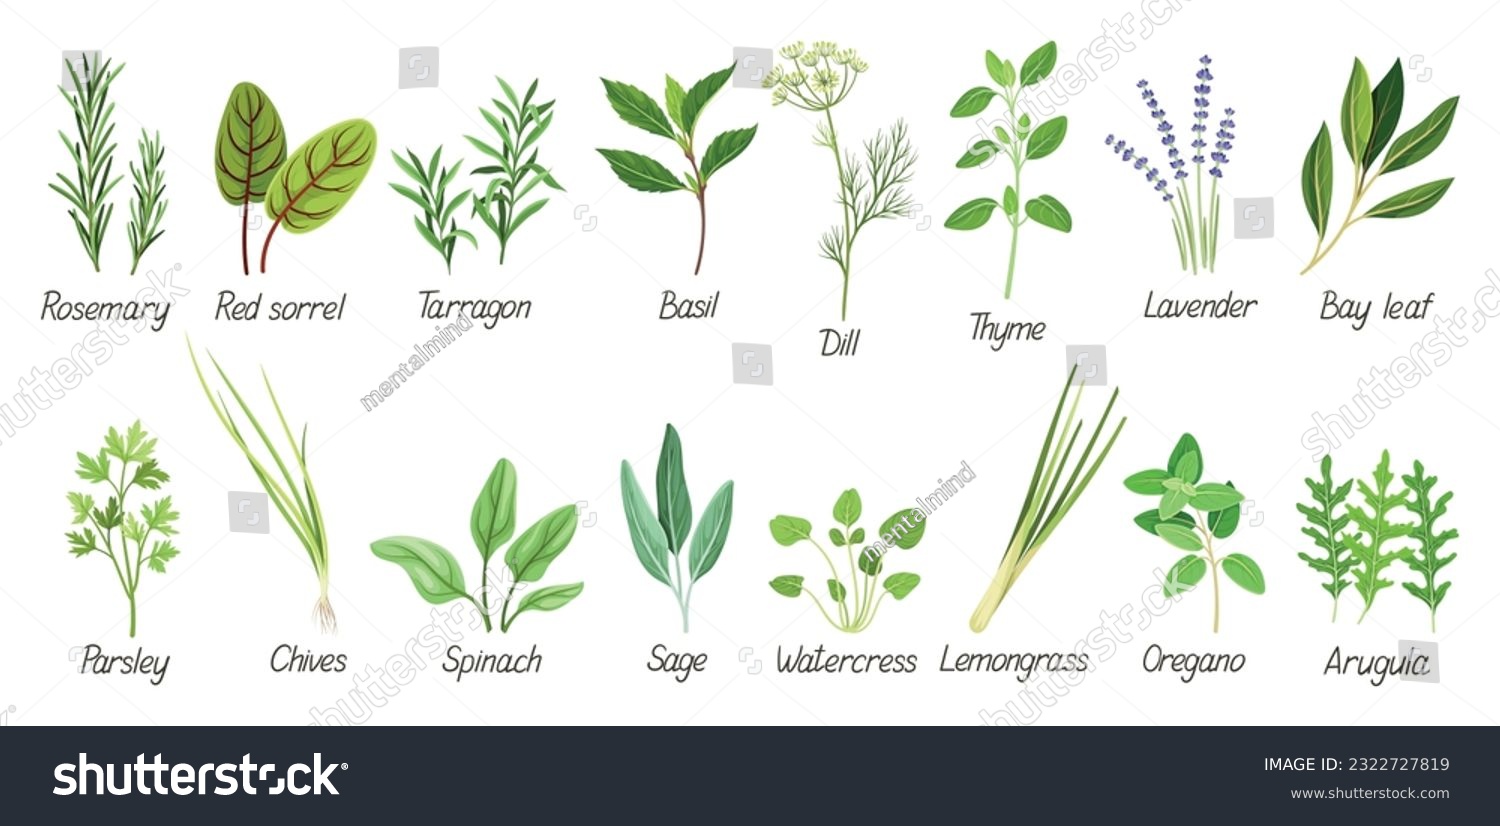 SVG of Set with herbs. Green grass, leaves, oregano, rosemary, basil, dill, lavender, lemongrass and other spices. Plants for medicine or cooking. Cartoon flat vector collection isolated on white background svg